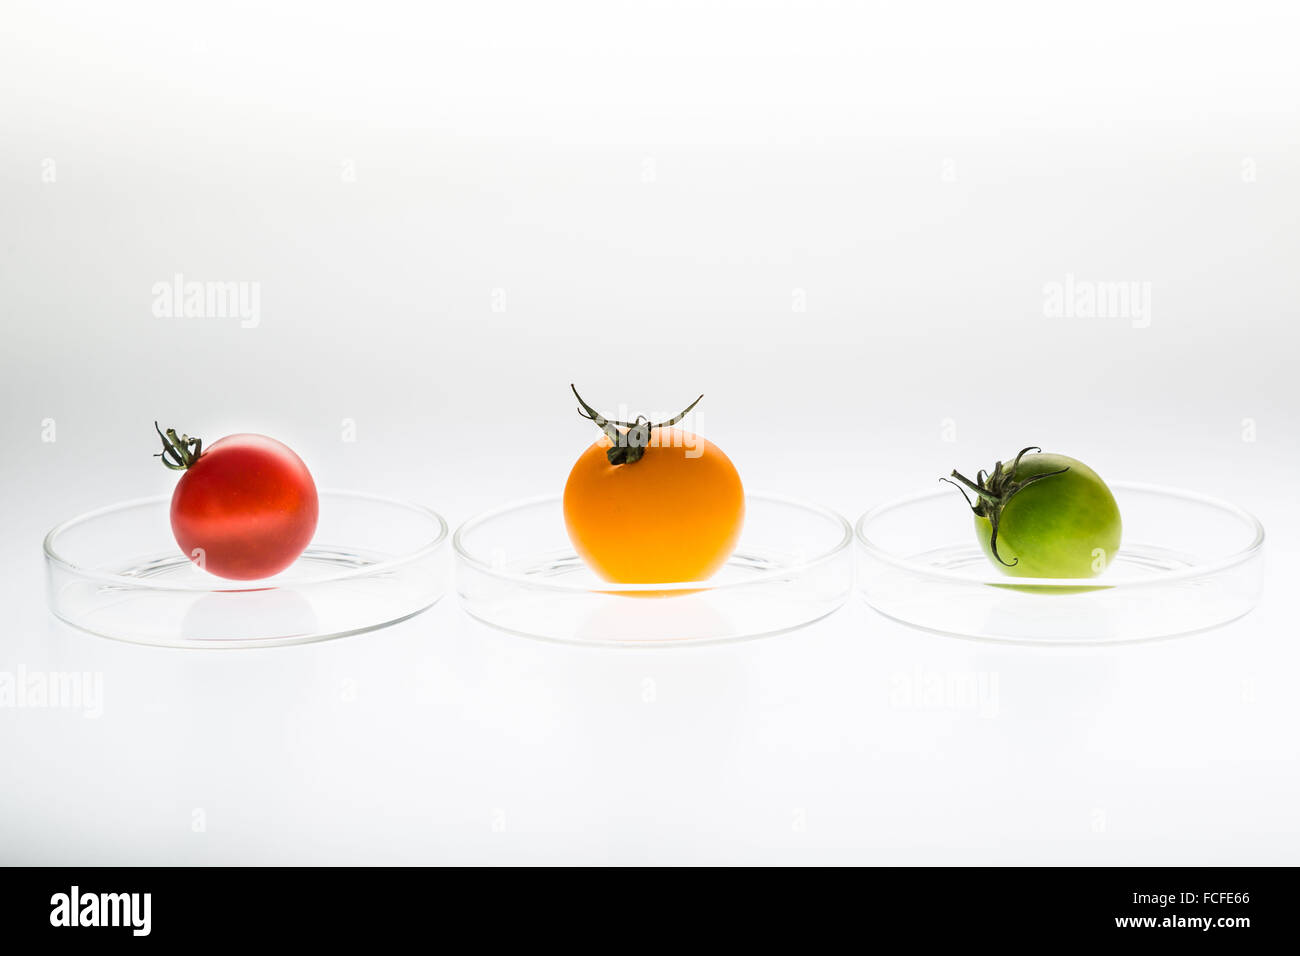 Genetic modification of tomatoes. Conceptual image of slices of tomatoes in petri dishes. Stock Photo